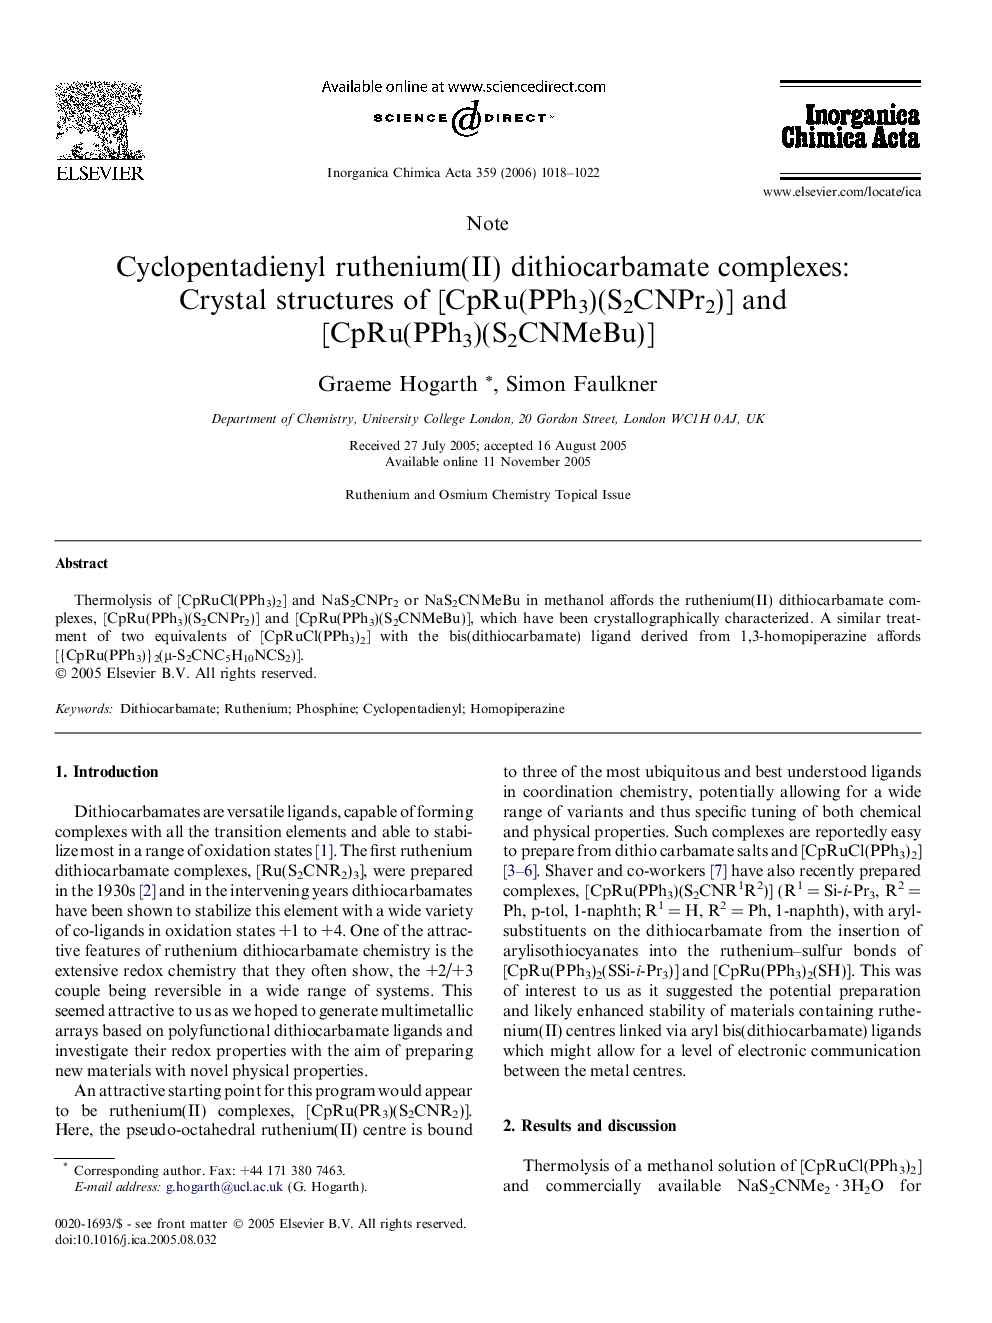 Cyclopentadienyl ruthenium(II) dithiocarbamate complexes: Crystal structures of [CpRu(PPh3)(S2CNPr2)] and [CpRu(PPh3)(S2CNMeBu)]